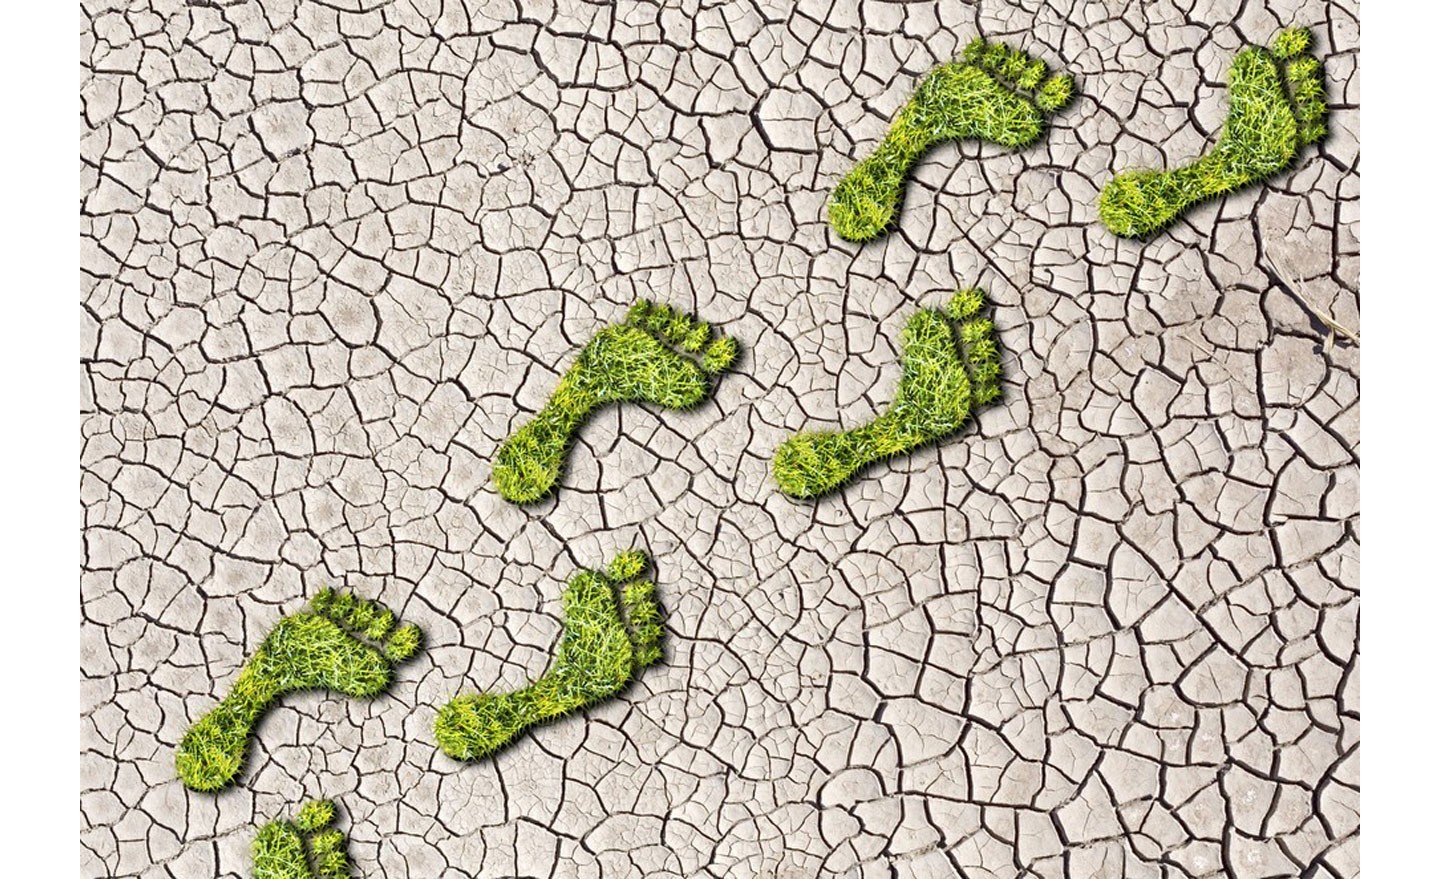 Green grass growing in footprints on a cracked earth background.